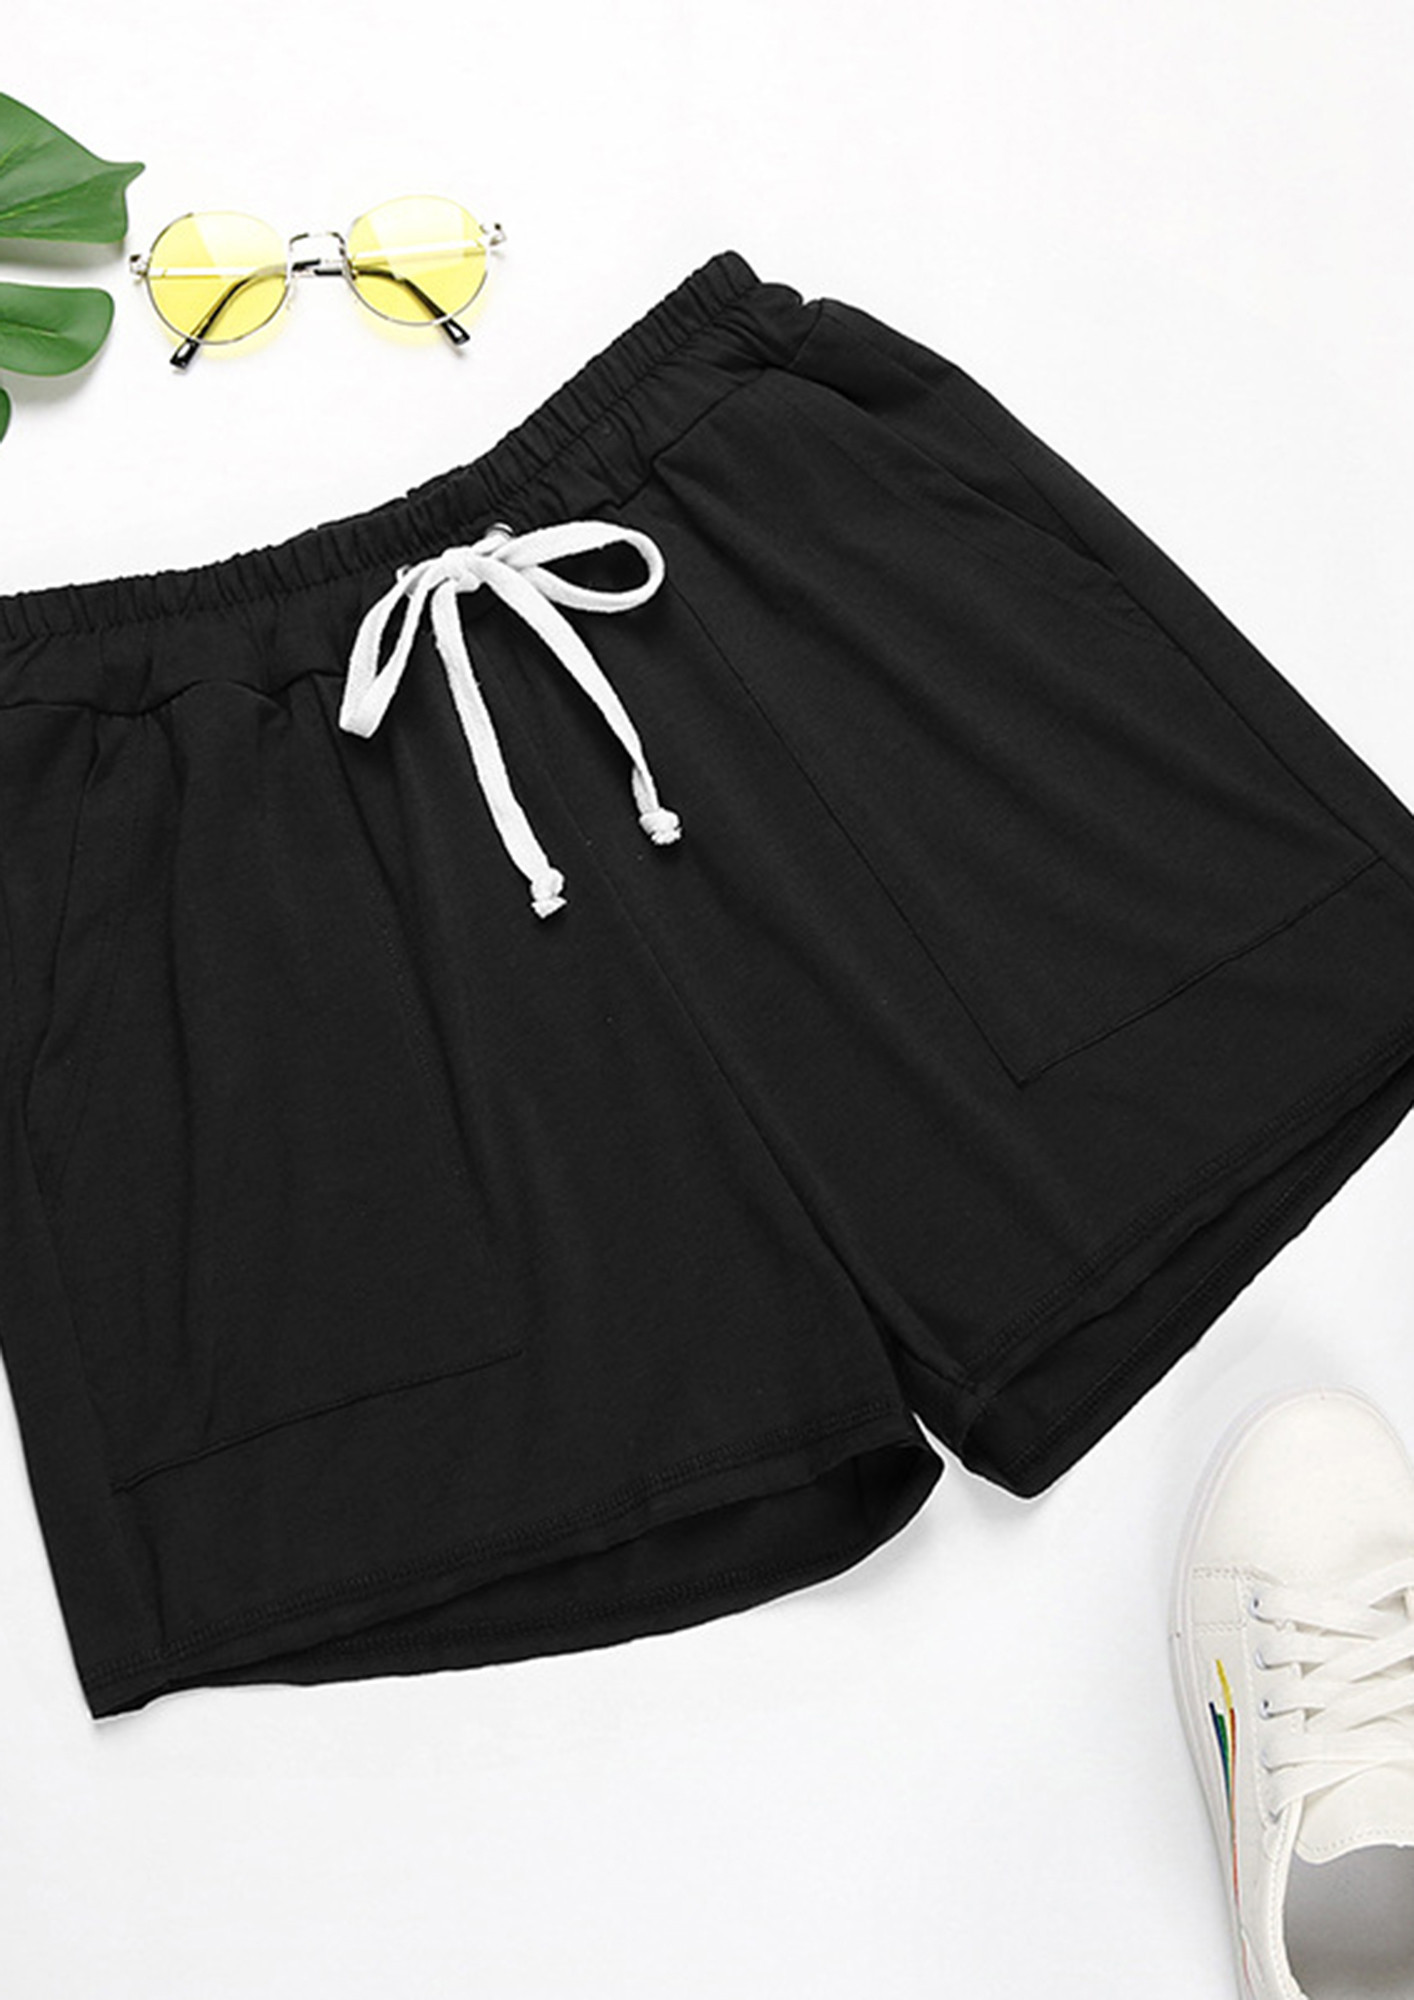 Fashionable black shorts for girls and ladies.